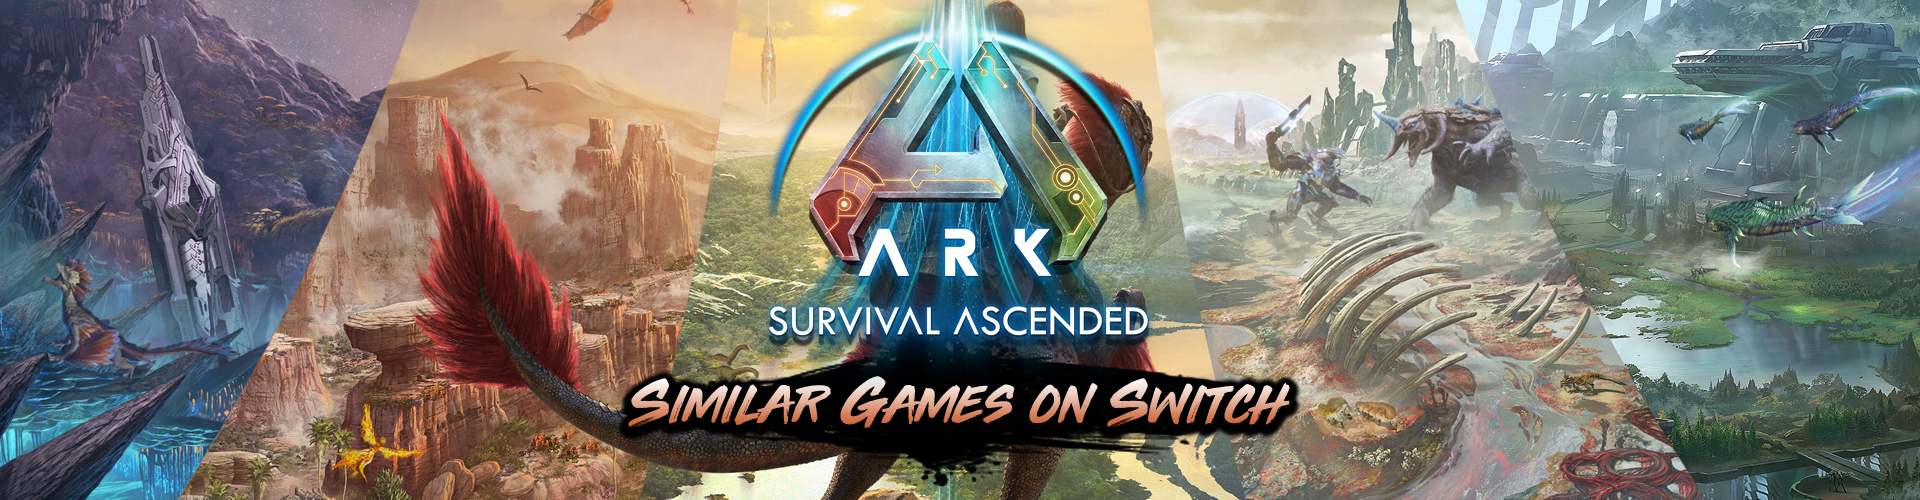 Switch Games Like ARK Survival Ascended